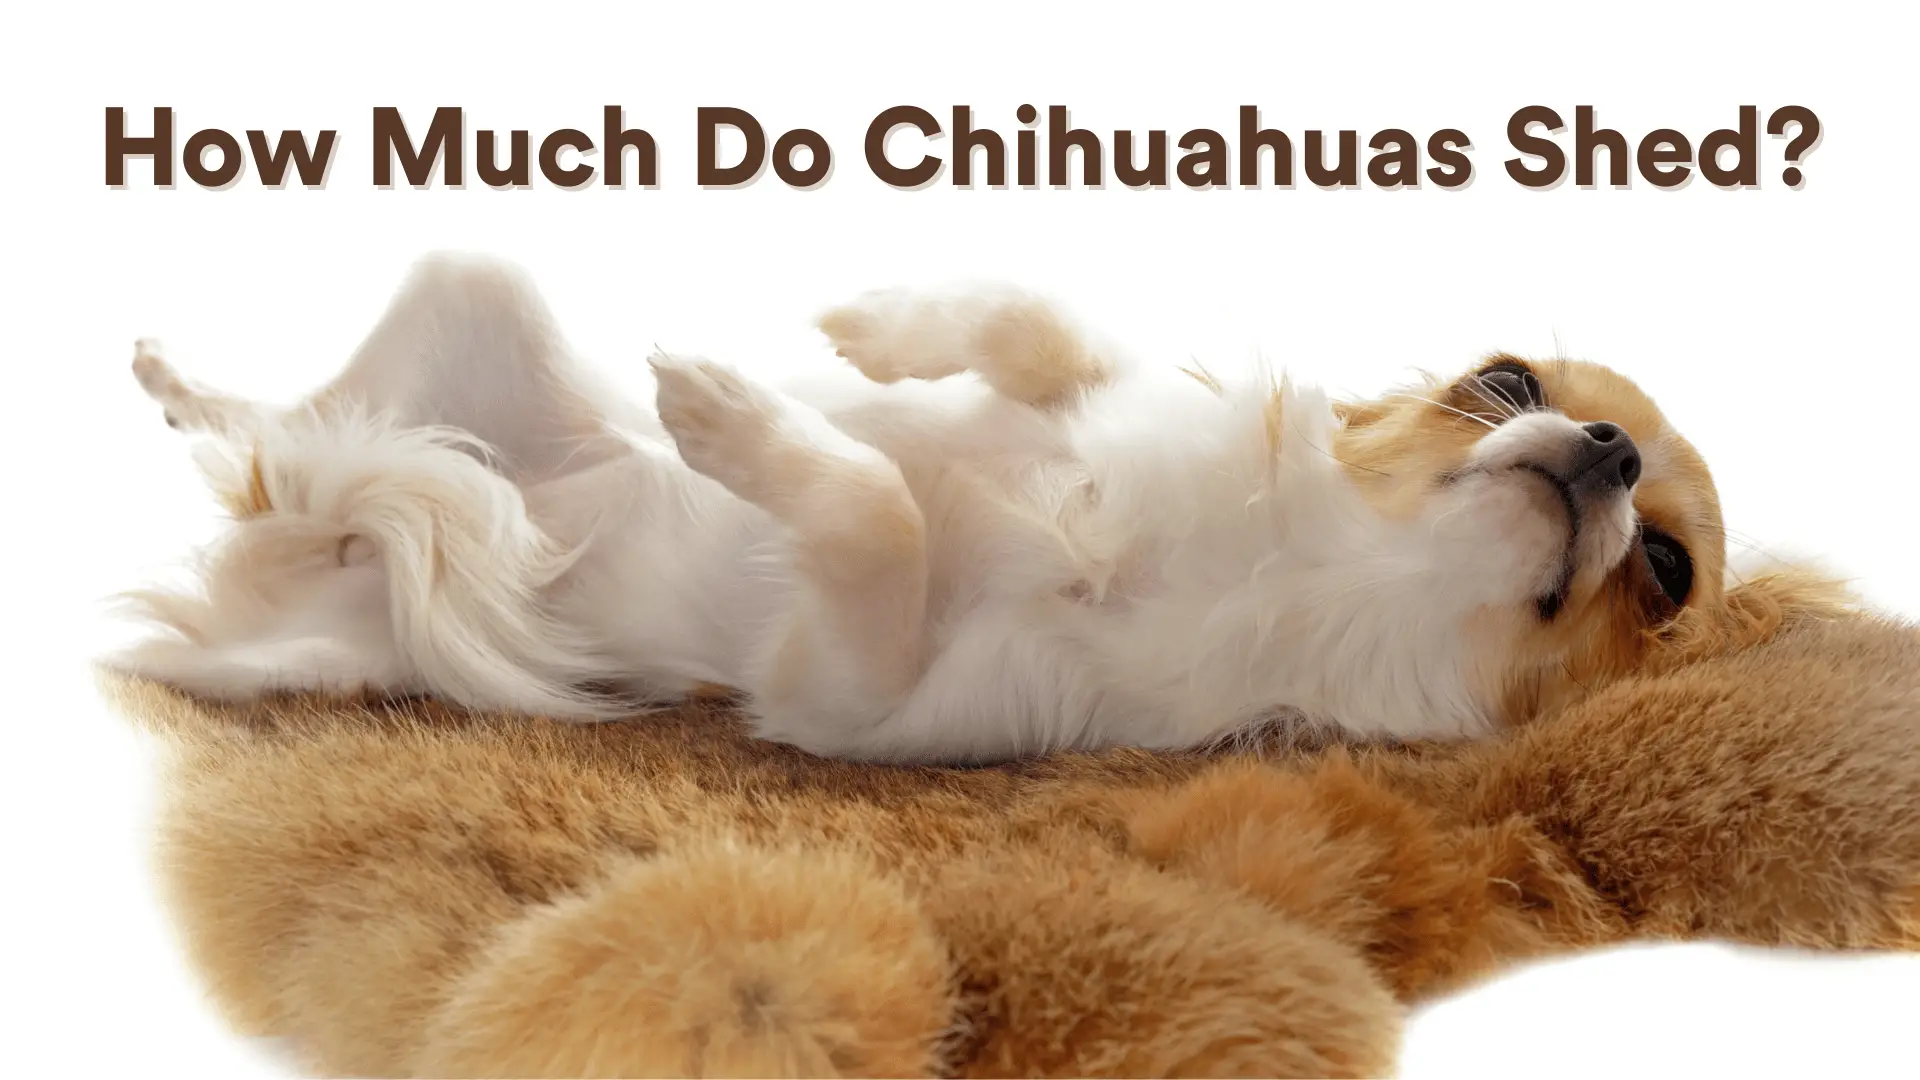 How Much Do Chihuahuas Shed?